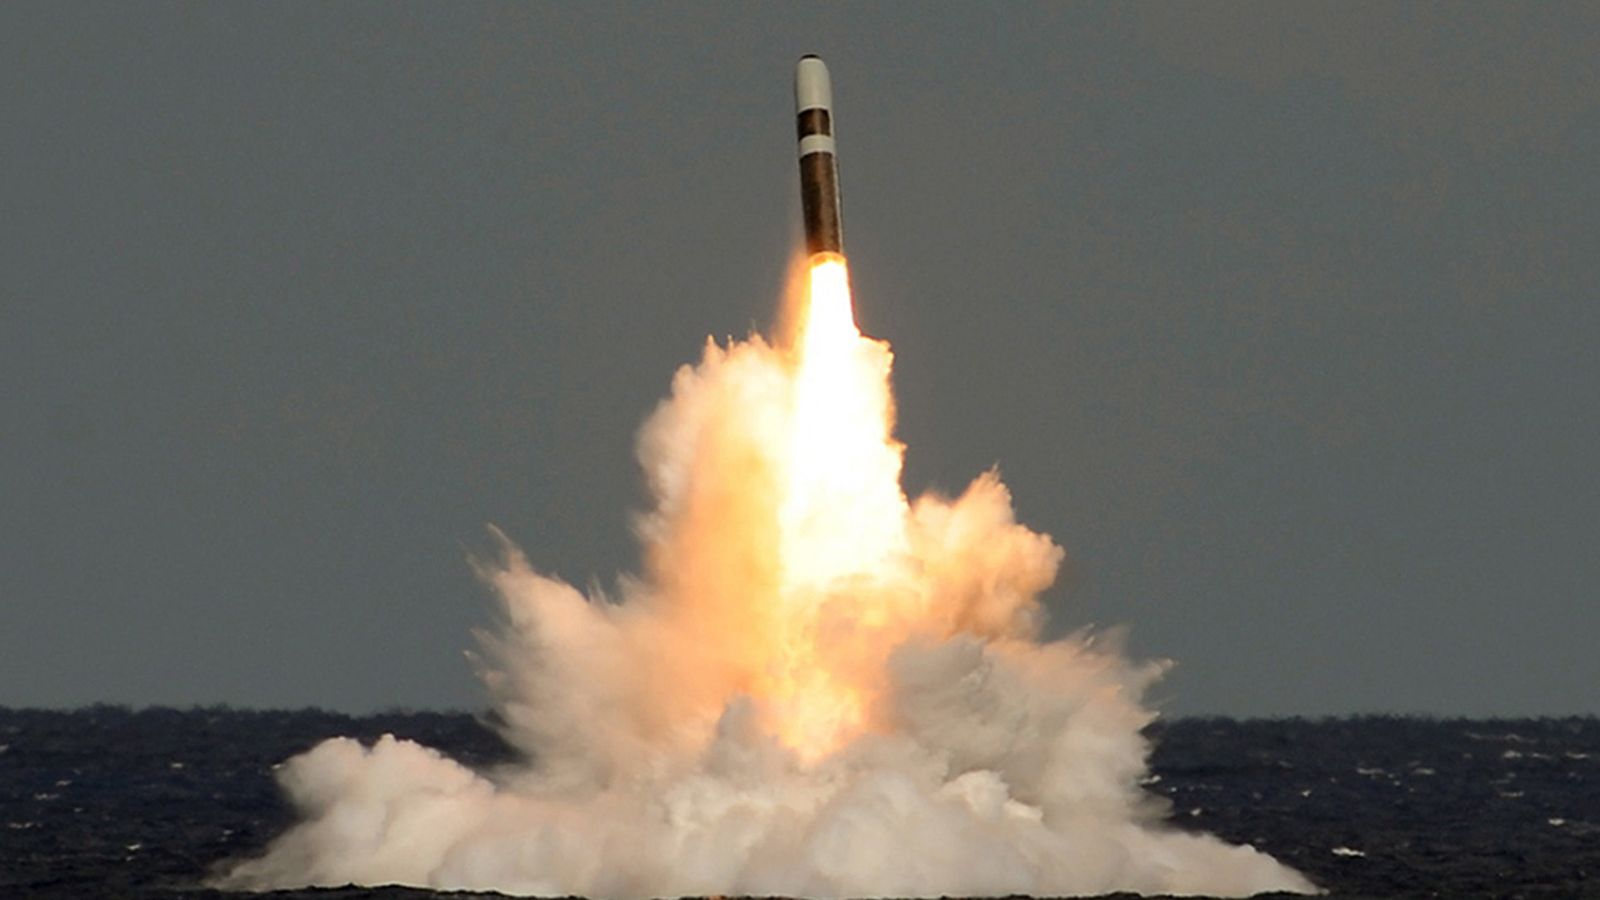 four things to note about the trident nuclear deterrent - and why the missile malfunction matters